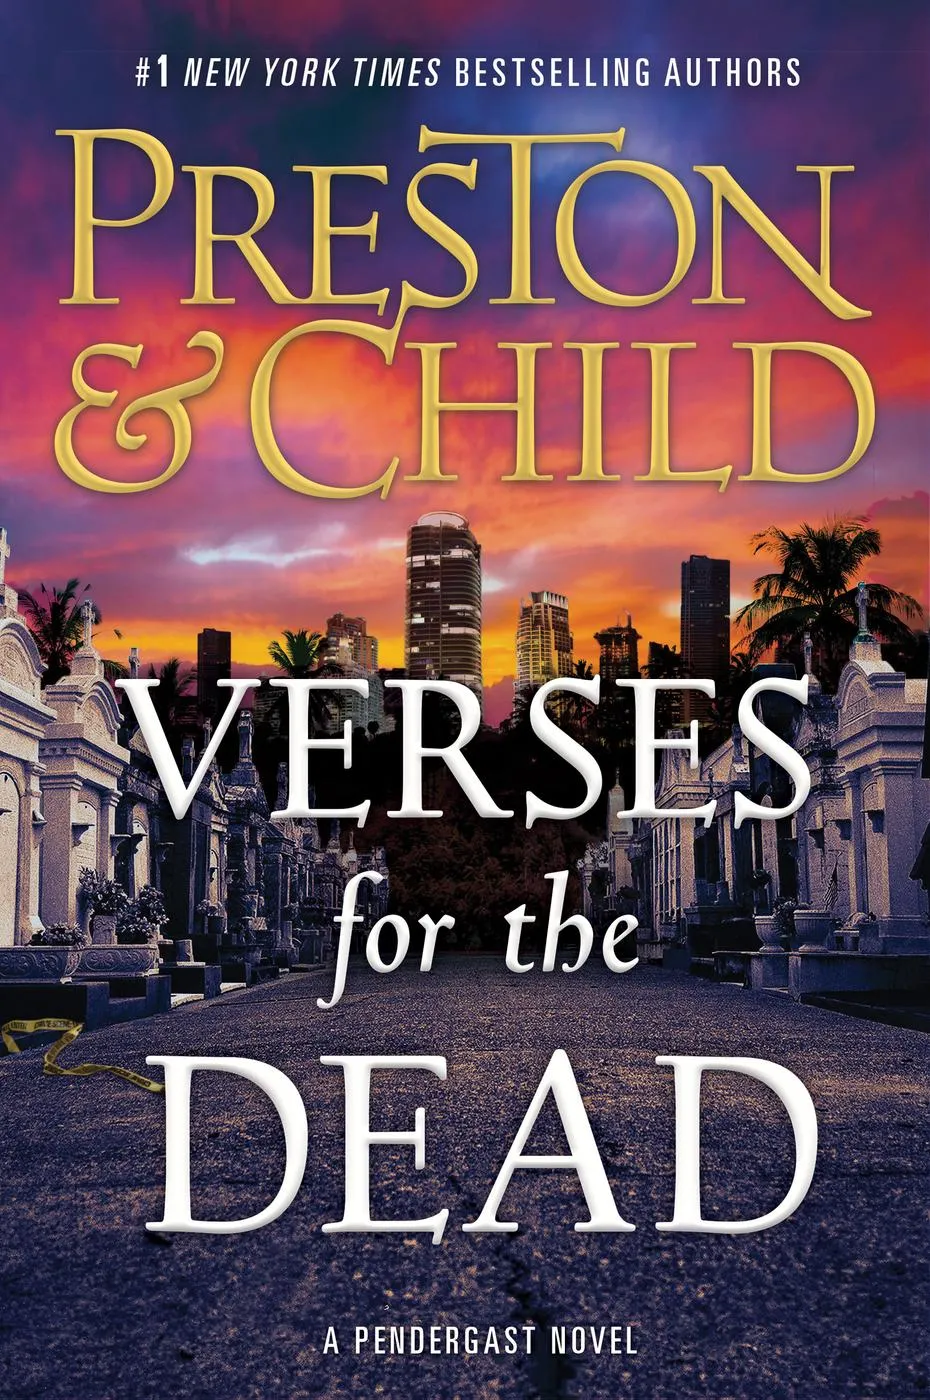 Verses for the Dead (Agent Pendergast #18)